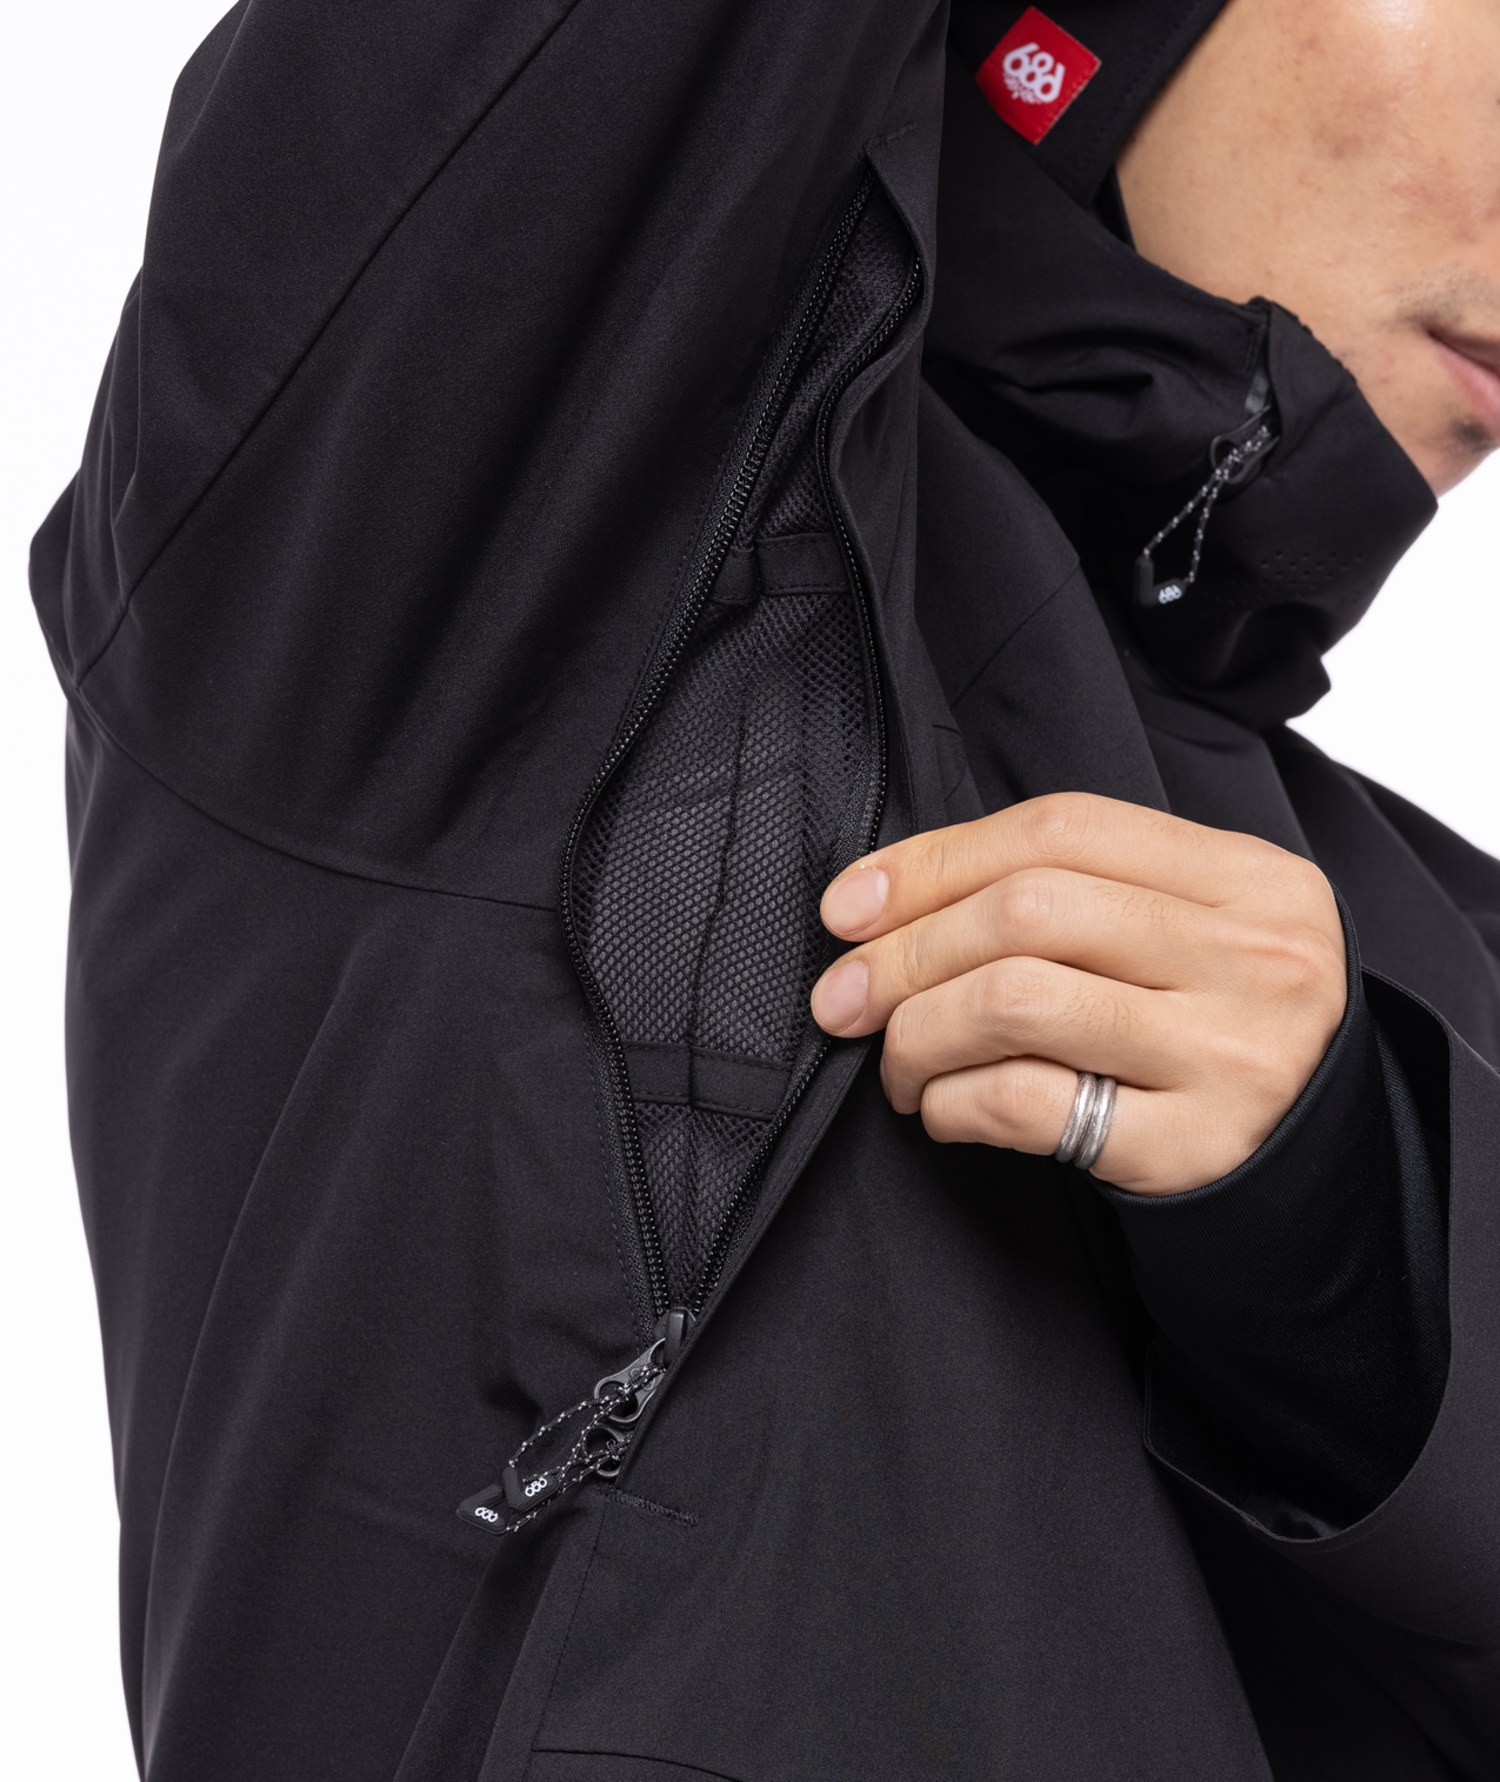 686 M Hydra Thermagraph Jacket | Black - S3 Boardshop